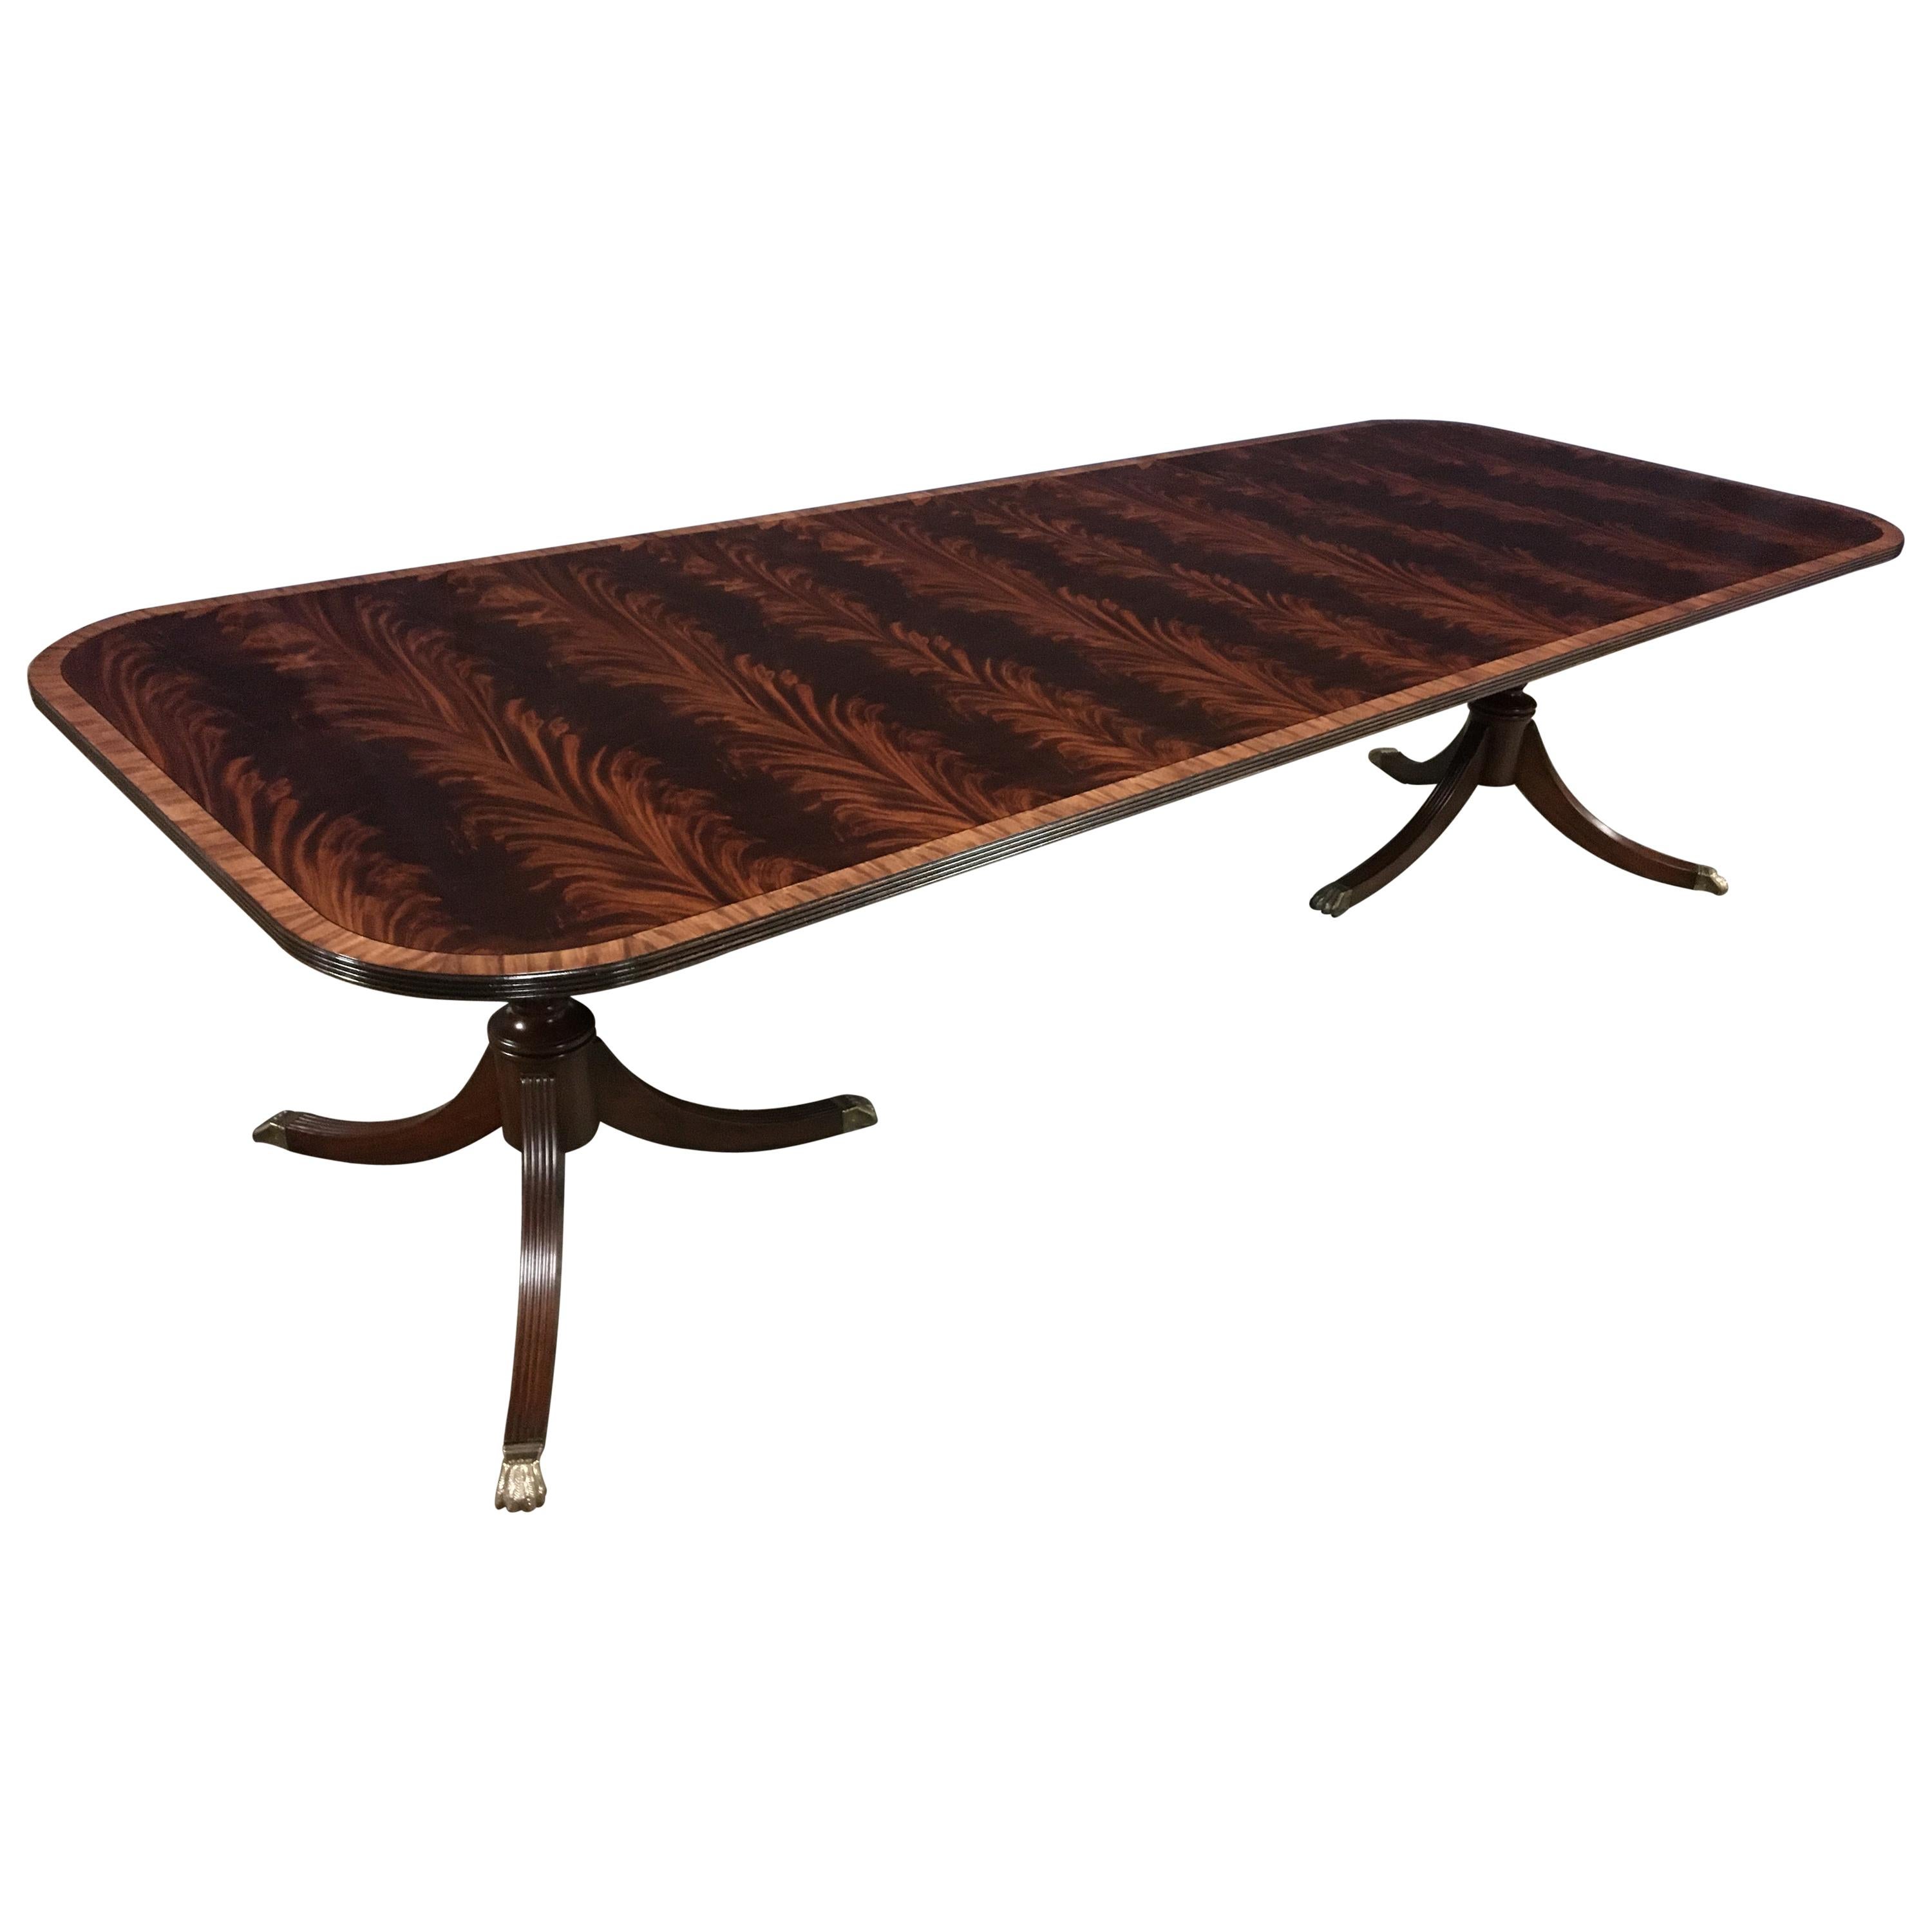 Banded Mahogany Georgian Style Dining Table by Leighton Hall For Sale